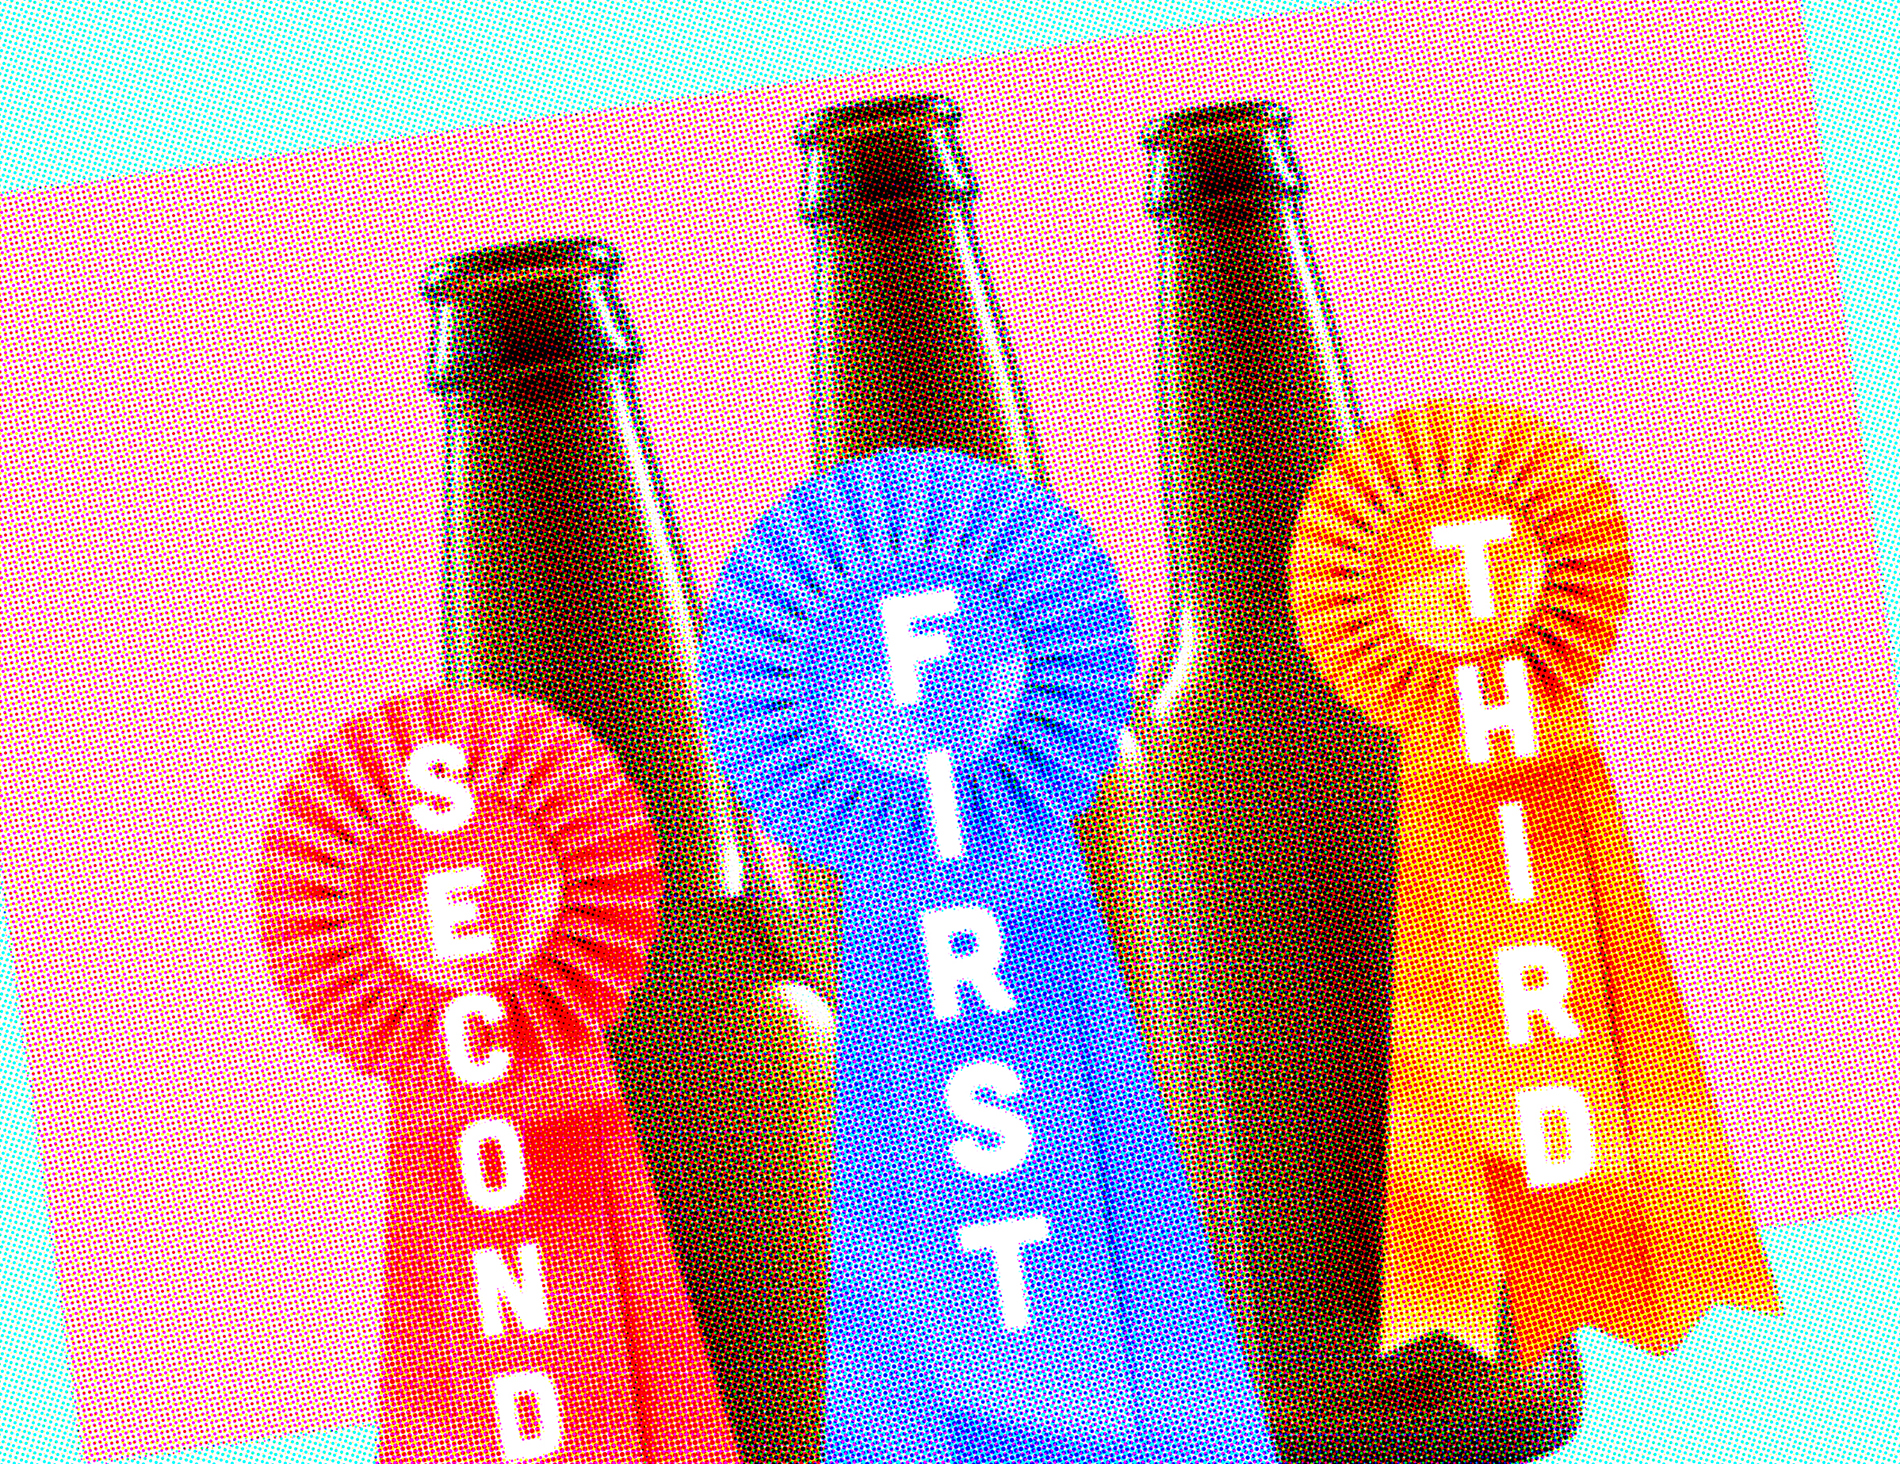 Beer contest graphic